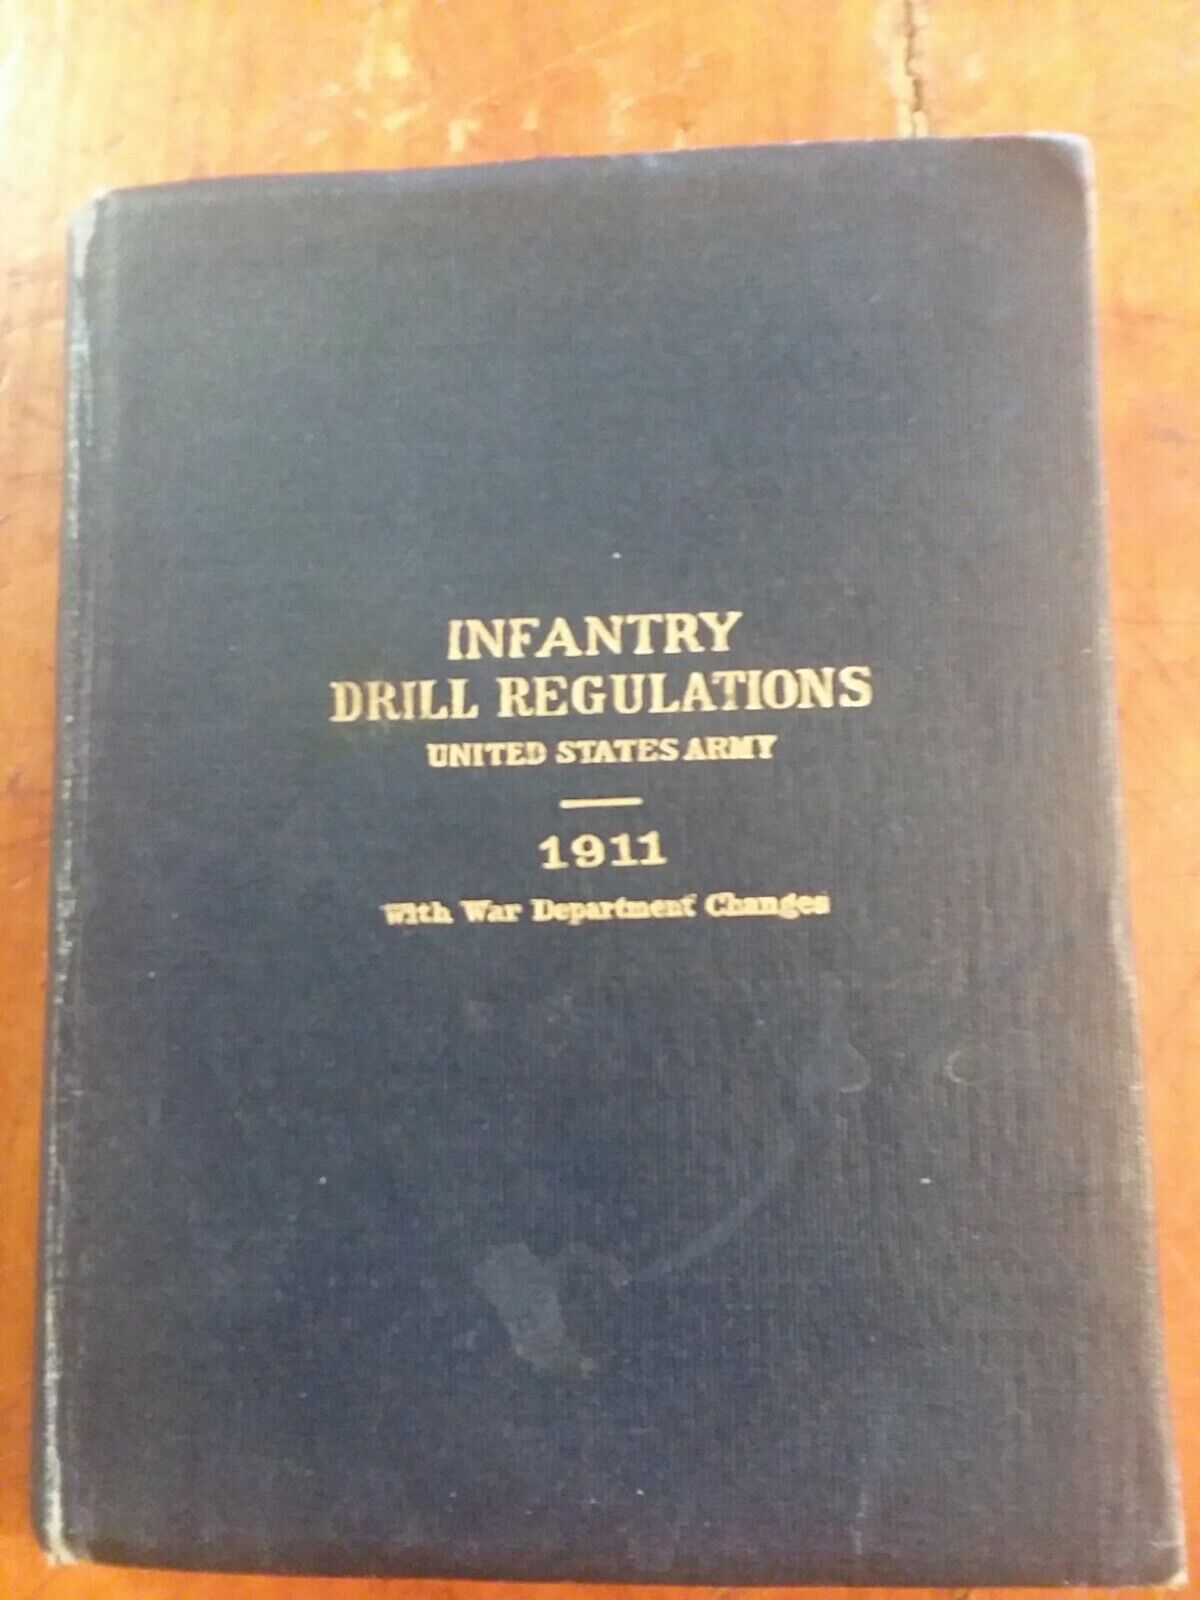 Infantry Drill Regulations US Army 1911, 247 pages with illustrations .